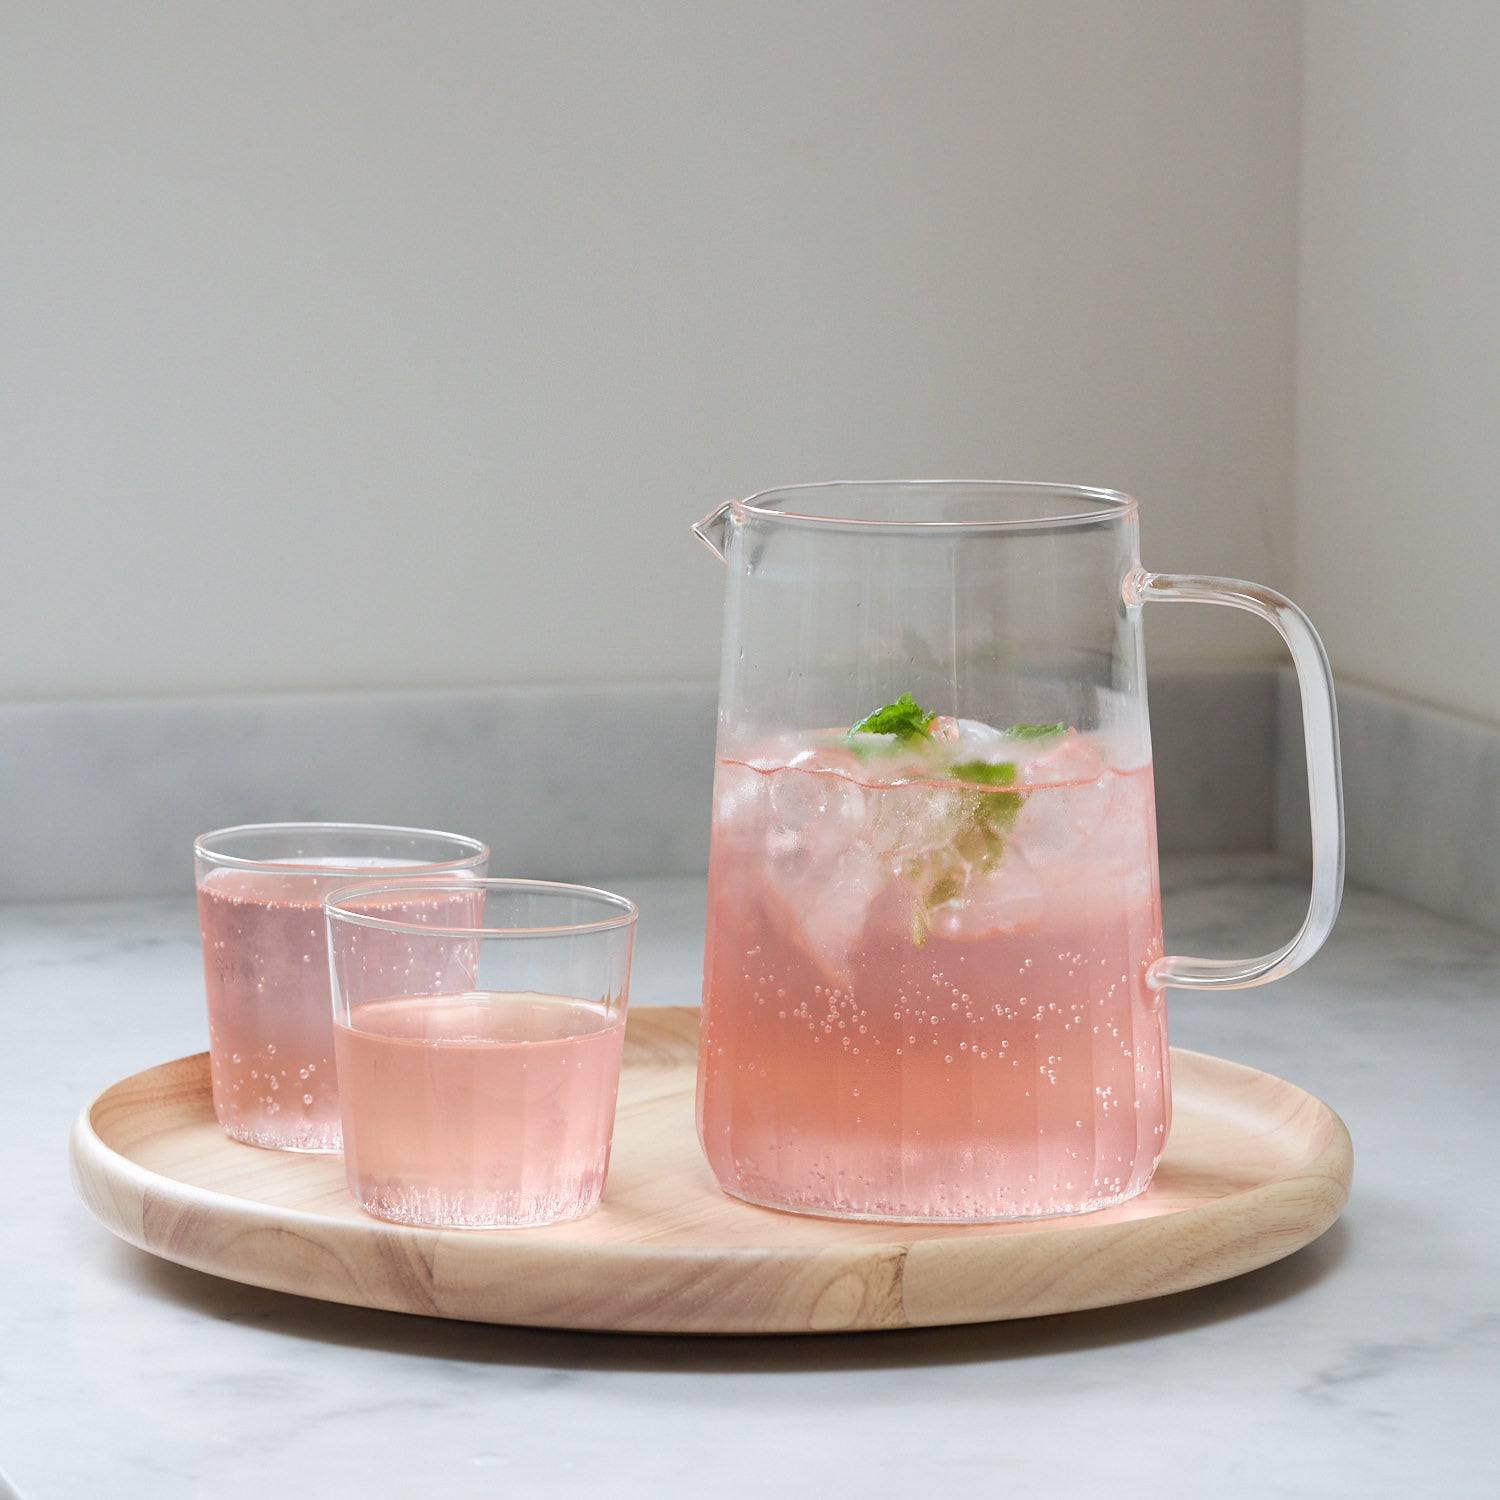 Yod and Co Rivington glass jug design by Blond design studio with pink gin